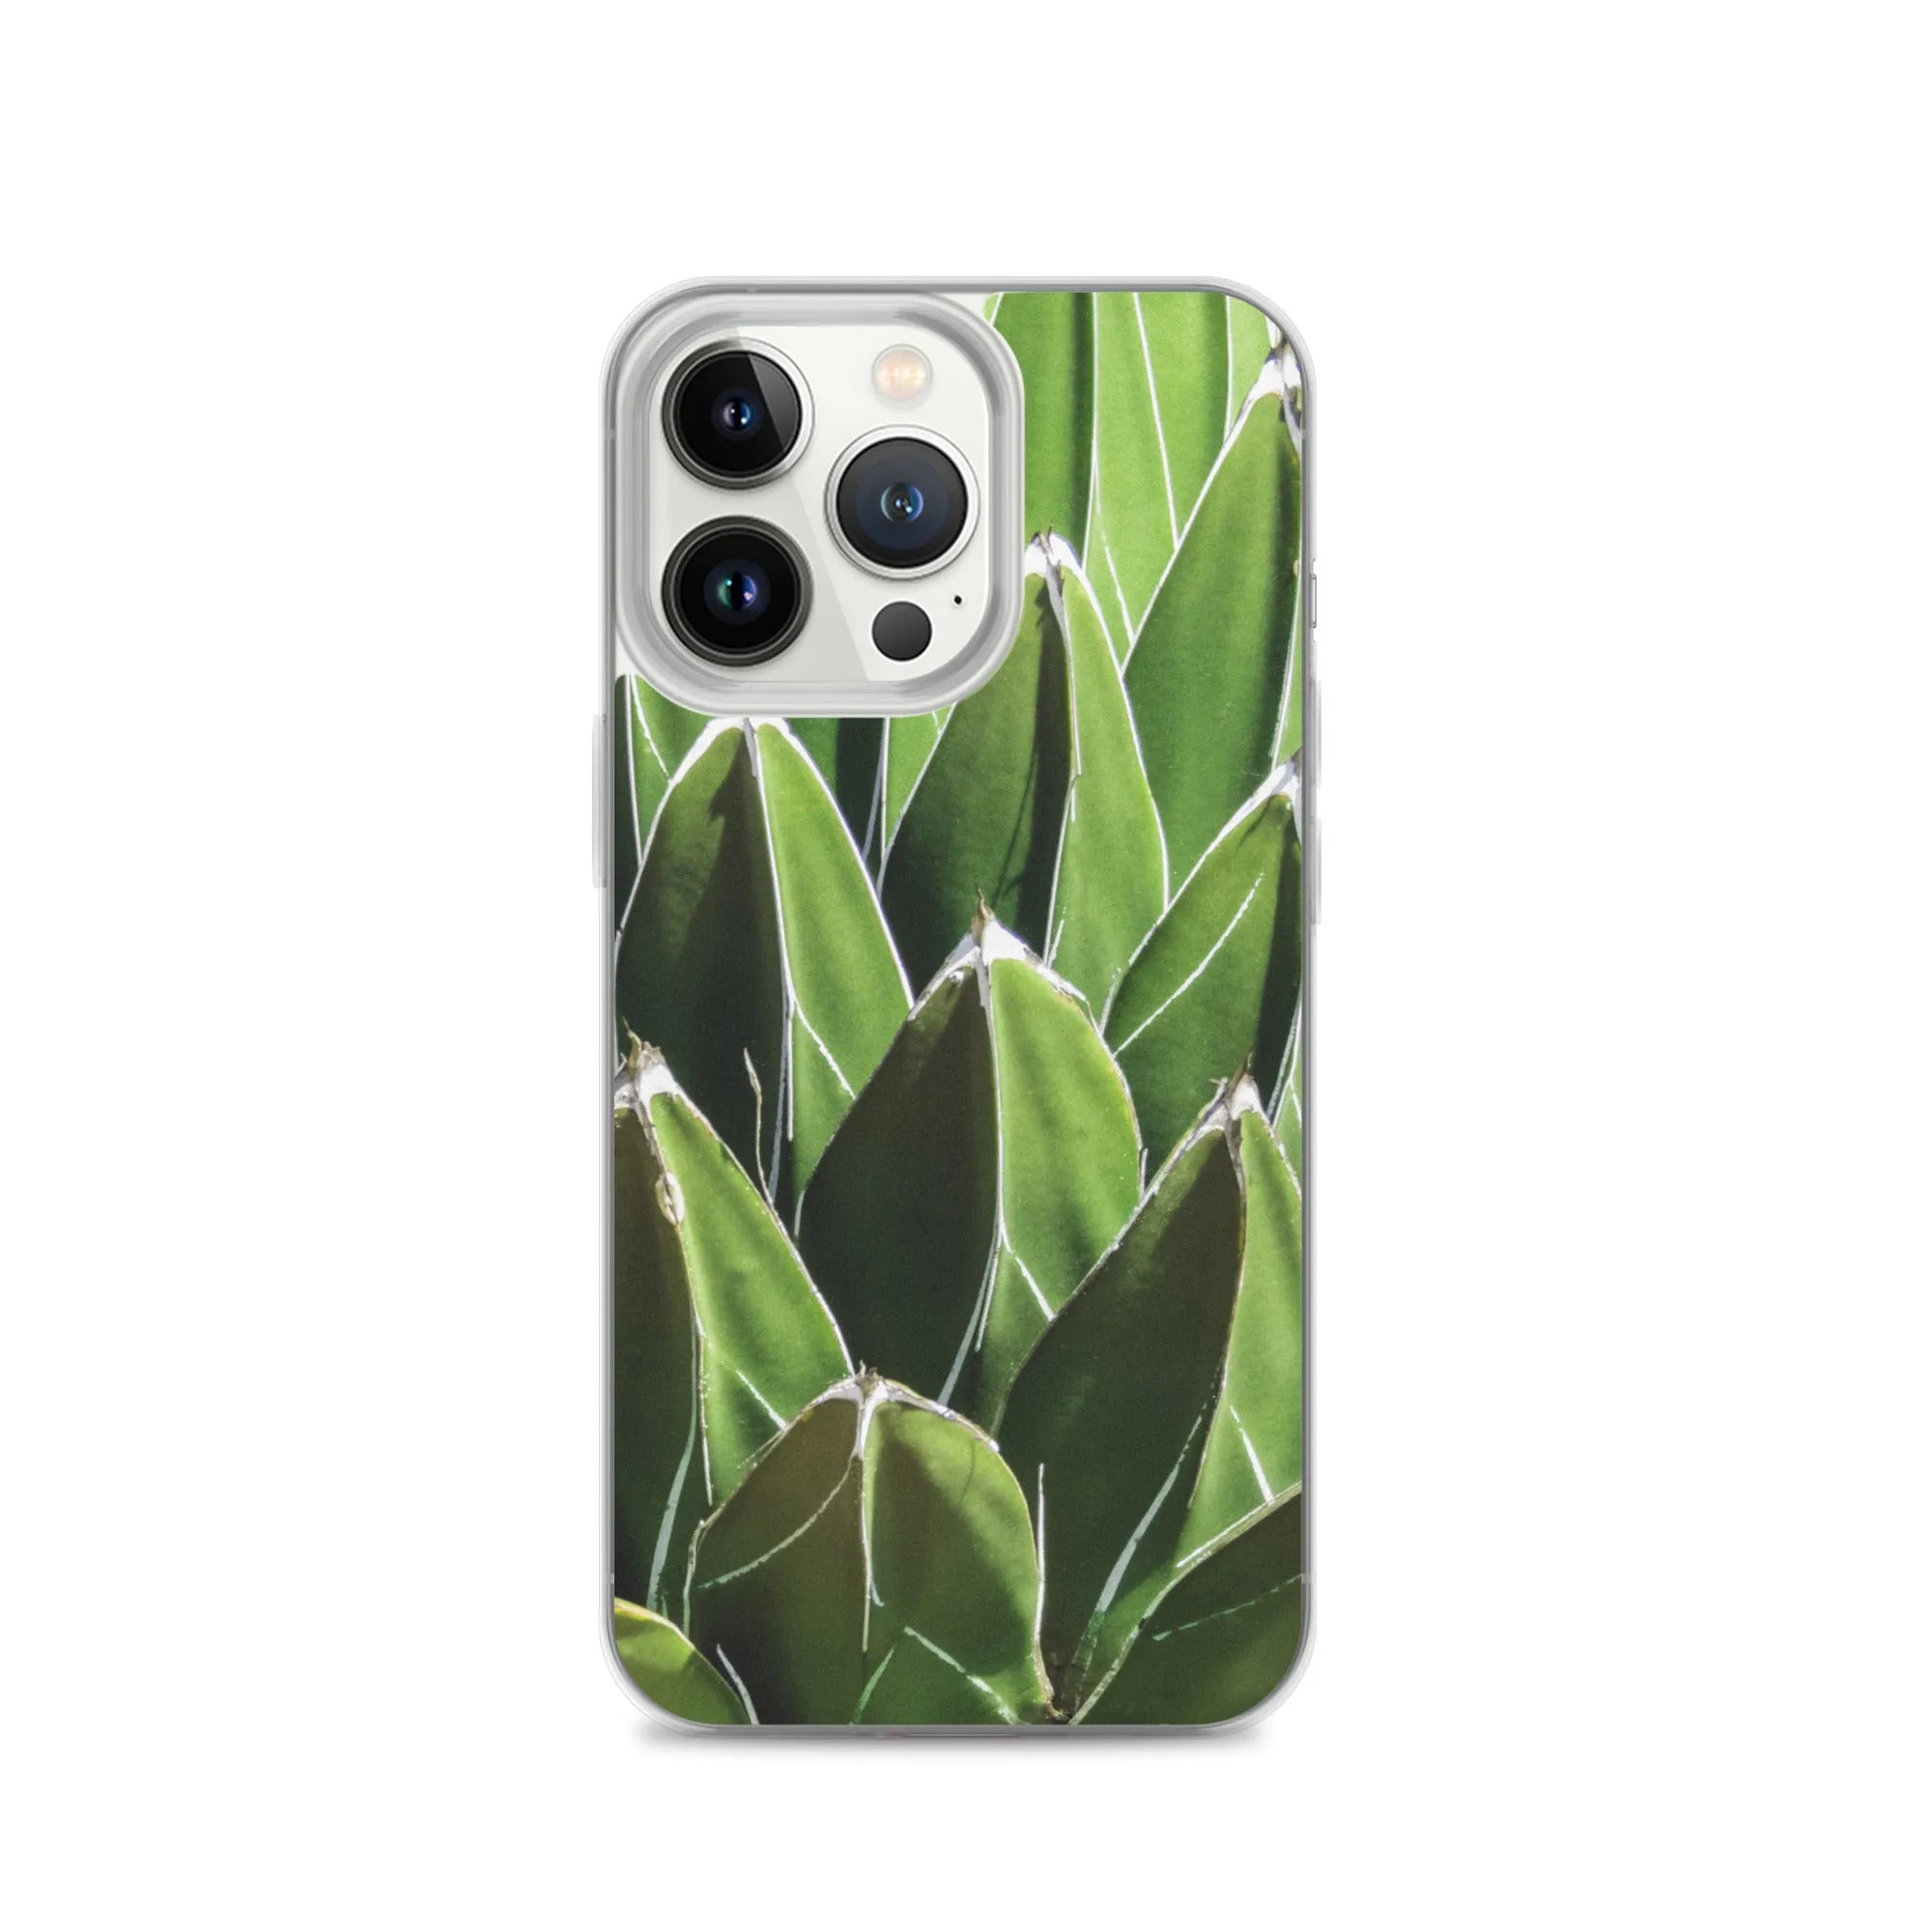 Decked Out Botanical Art Iphone Case - Iphone 13 Pro - Mobile Phone Cases - Aesthetic Art